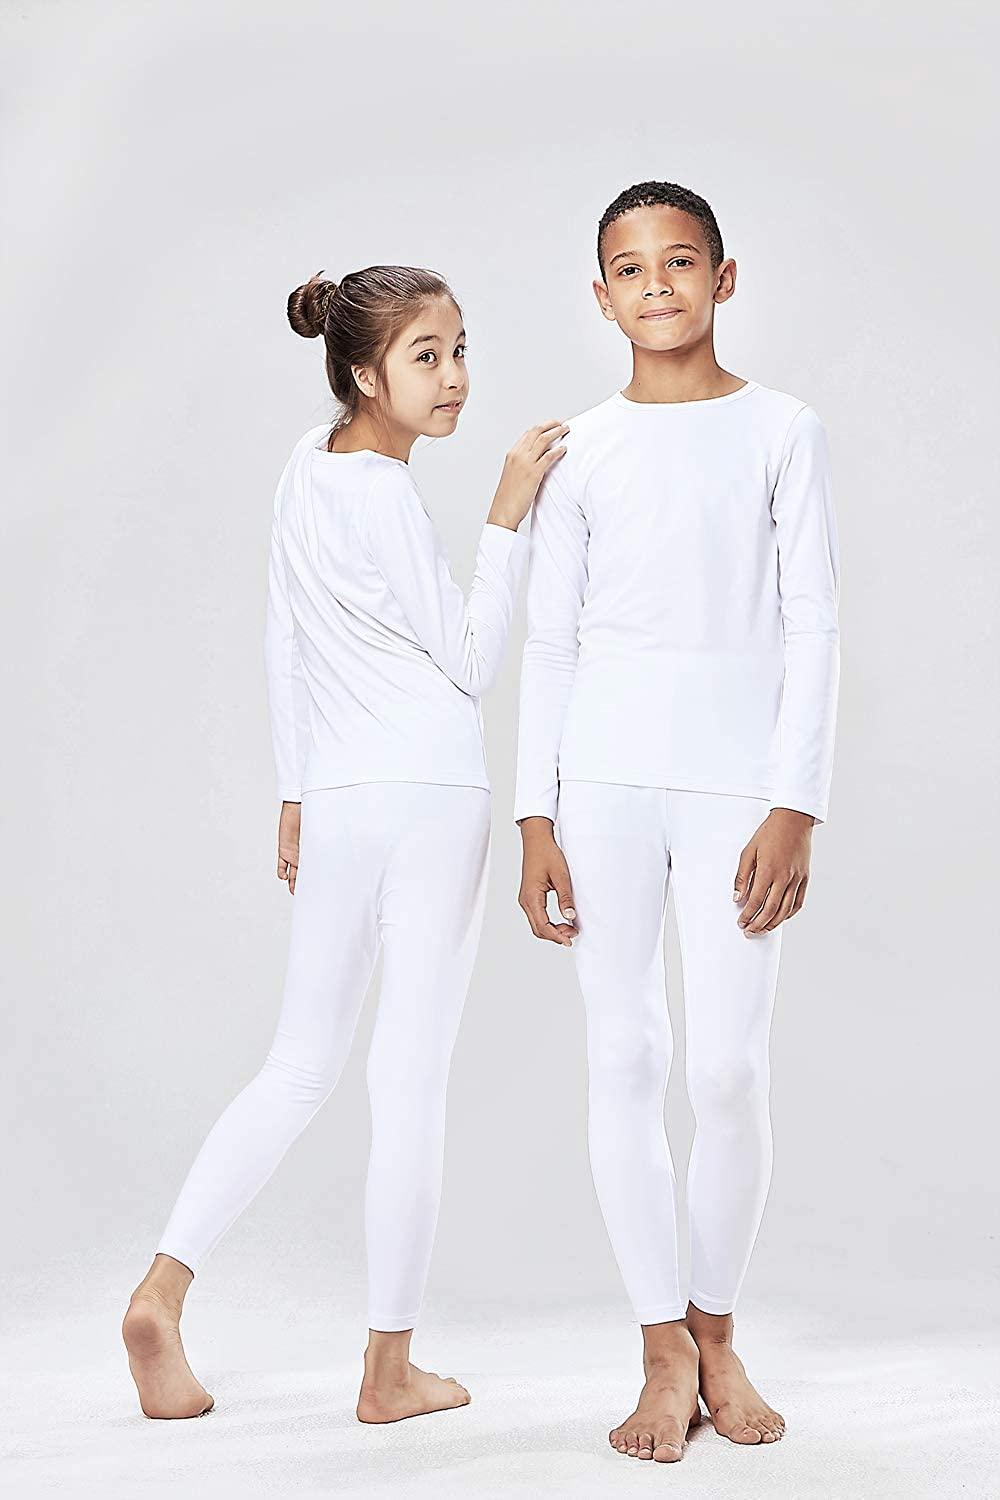 DEVOPS Boys and Girls Thermal Underwear Long Johns Set with Fleece Lined  Medium White